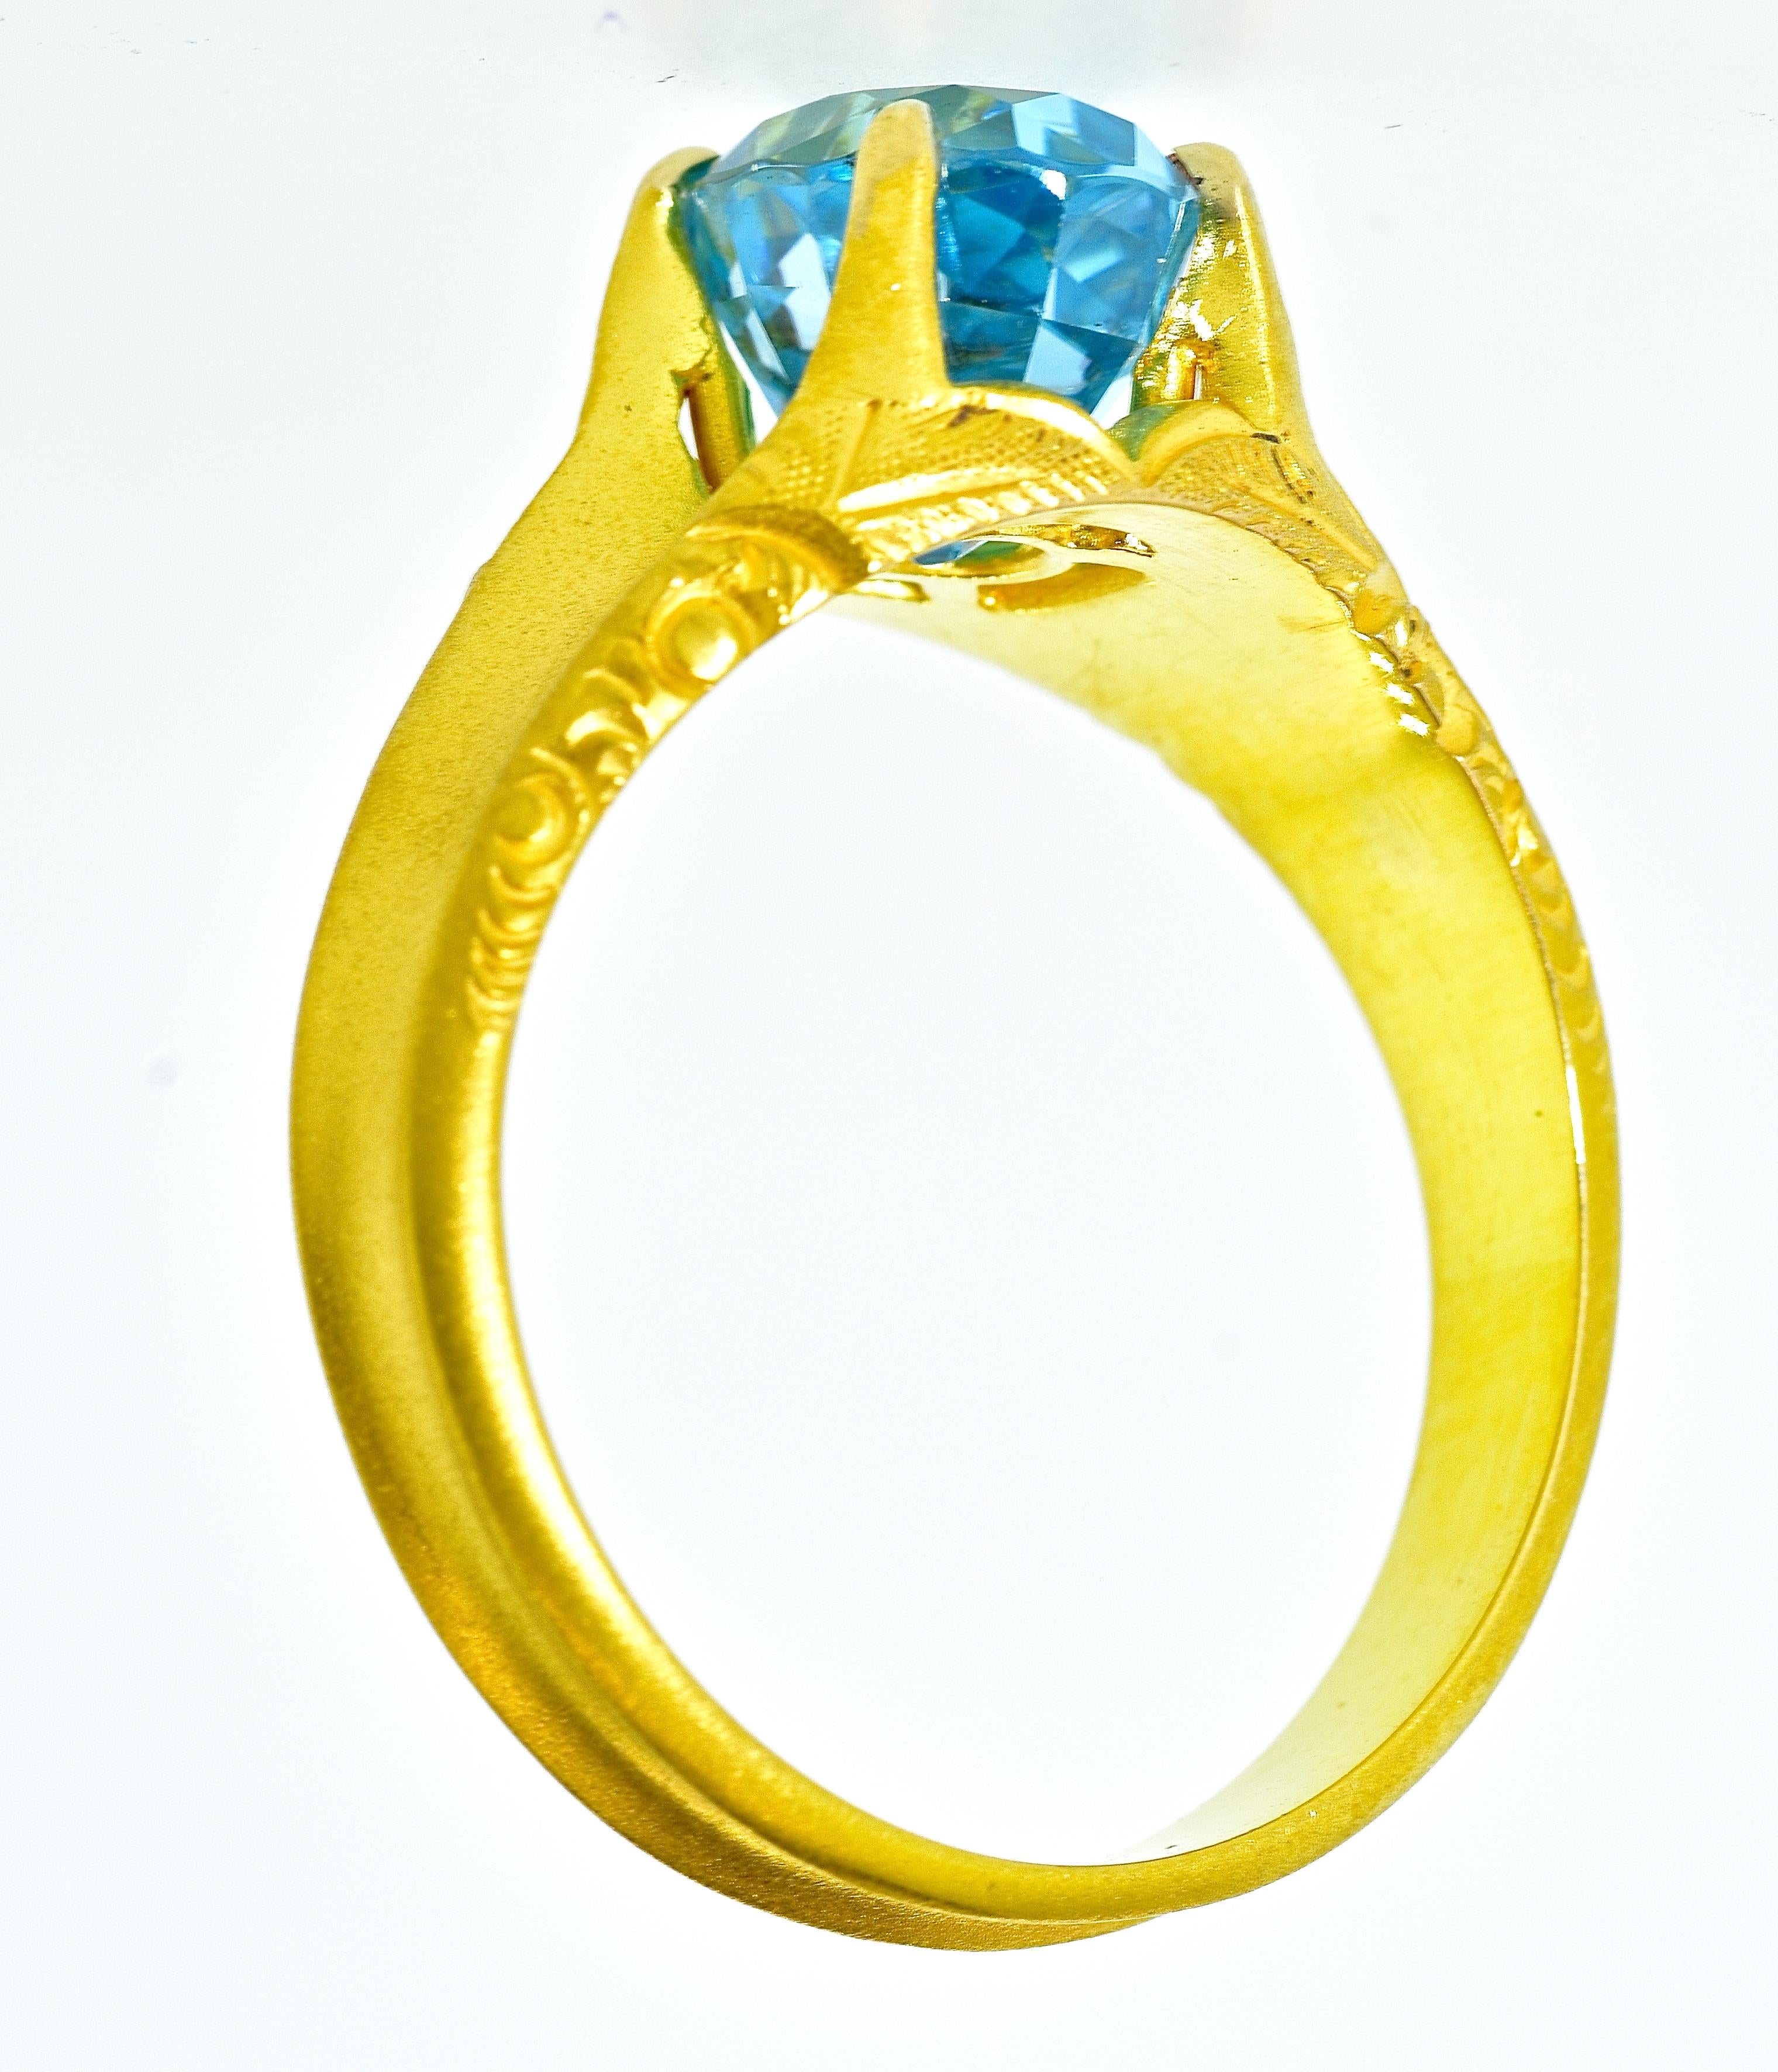 Antique 18K Ring  Centering a Natural Very Fine Blue Zircon, American, c. 1890 For Sale 3